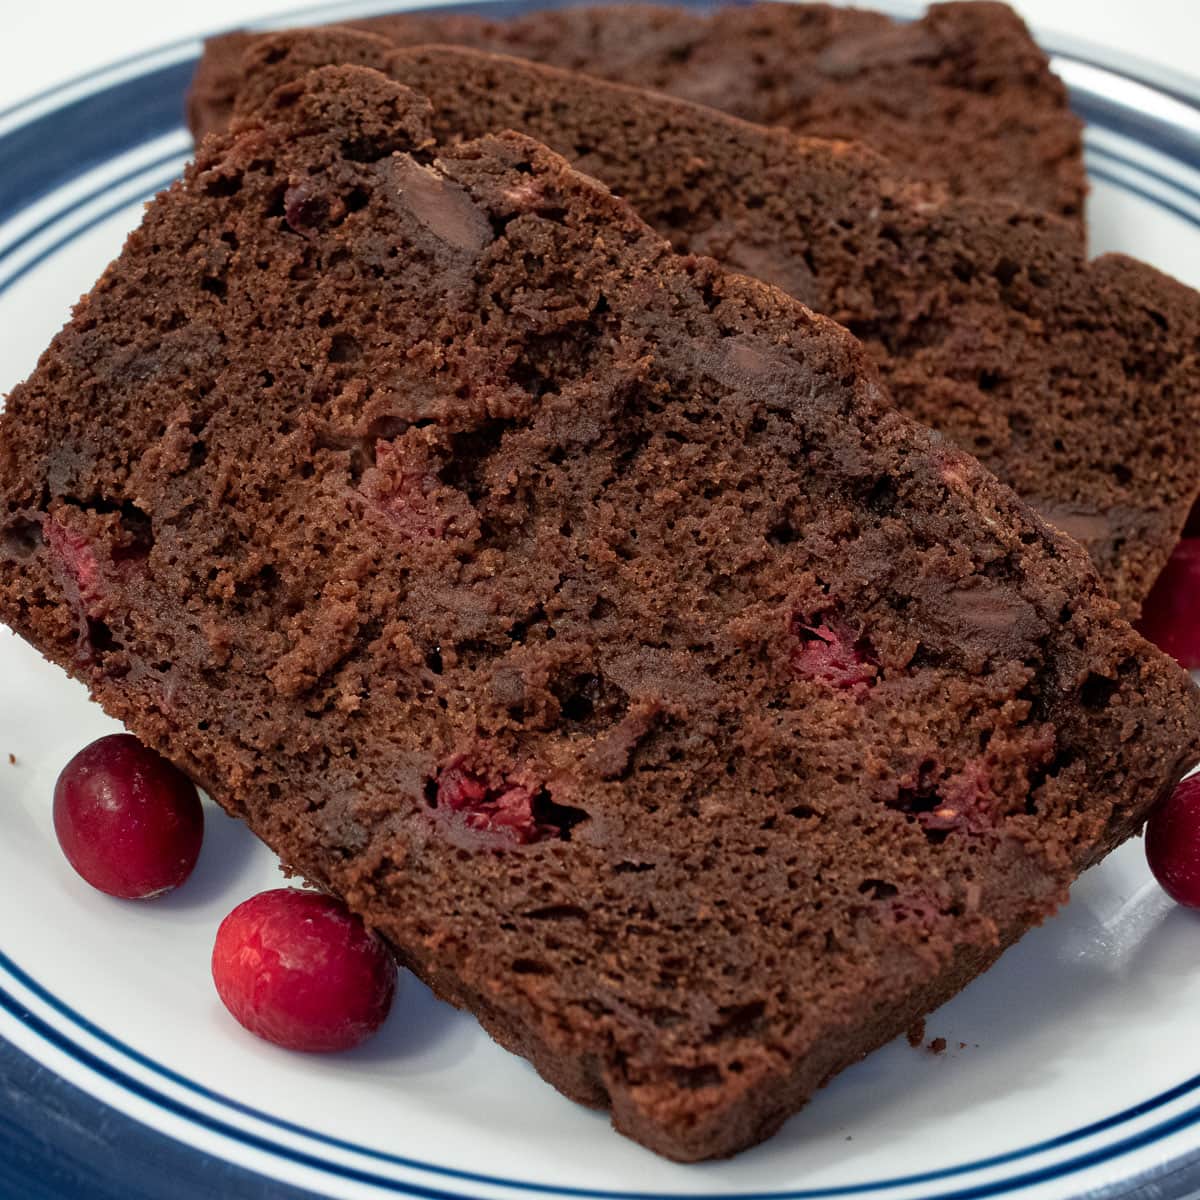 Slices of Chocolate Cranberry Quick Bread
served on a blue rimmed white plate with several fresh cranberries on the plate 